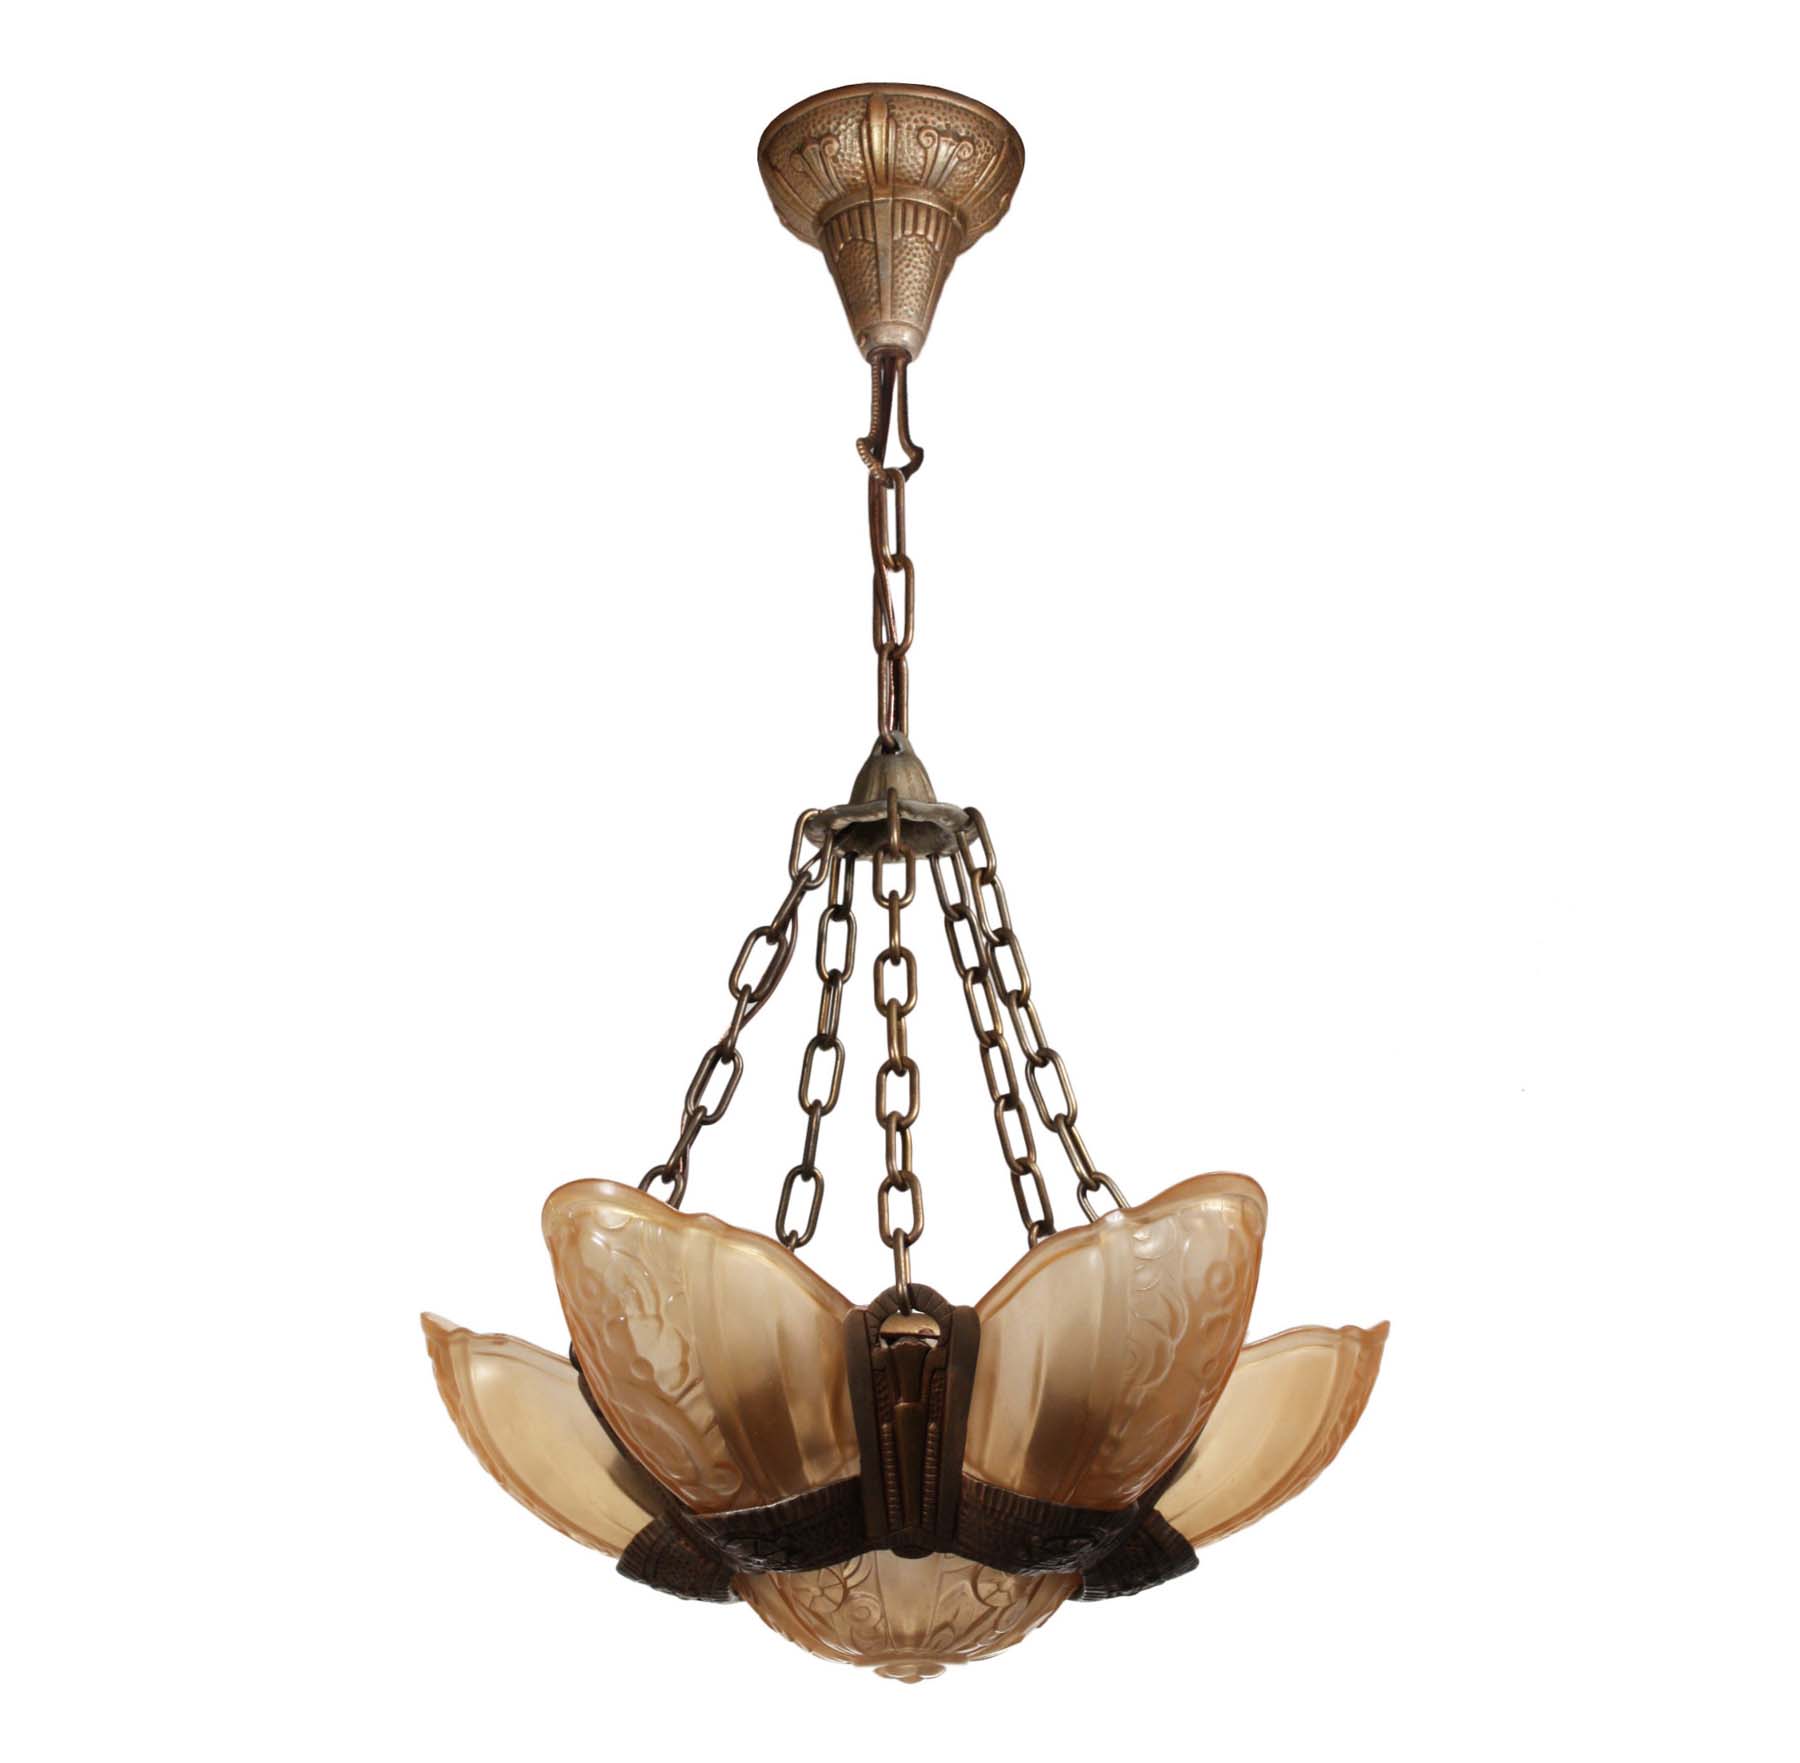 Art Deco Slip Shade Chandelier by Lincoln, Antique Lighting-68093